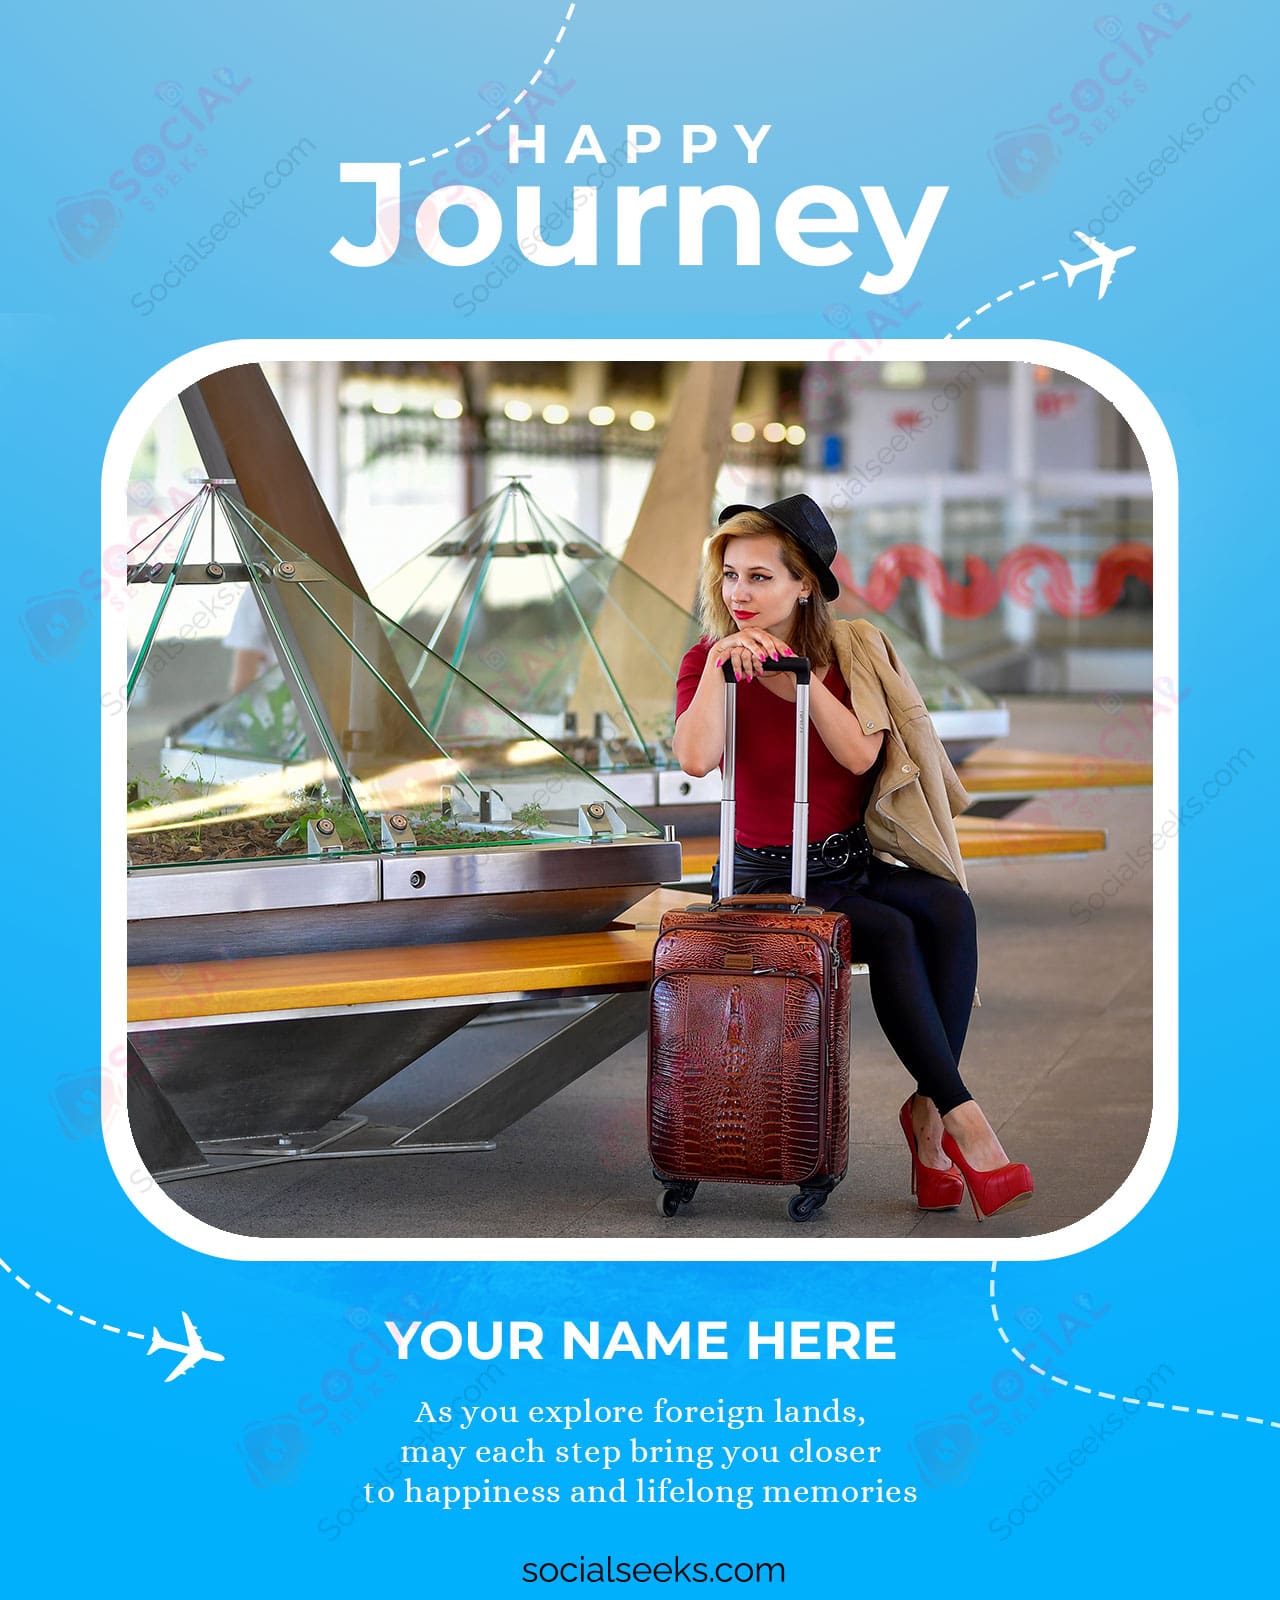 Happy Journey Wishes greeting card with name and photo